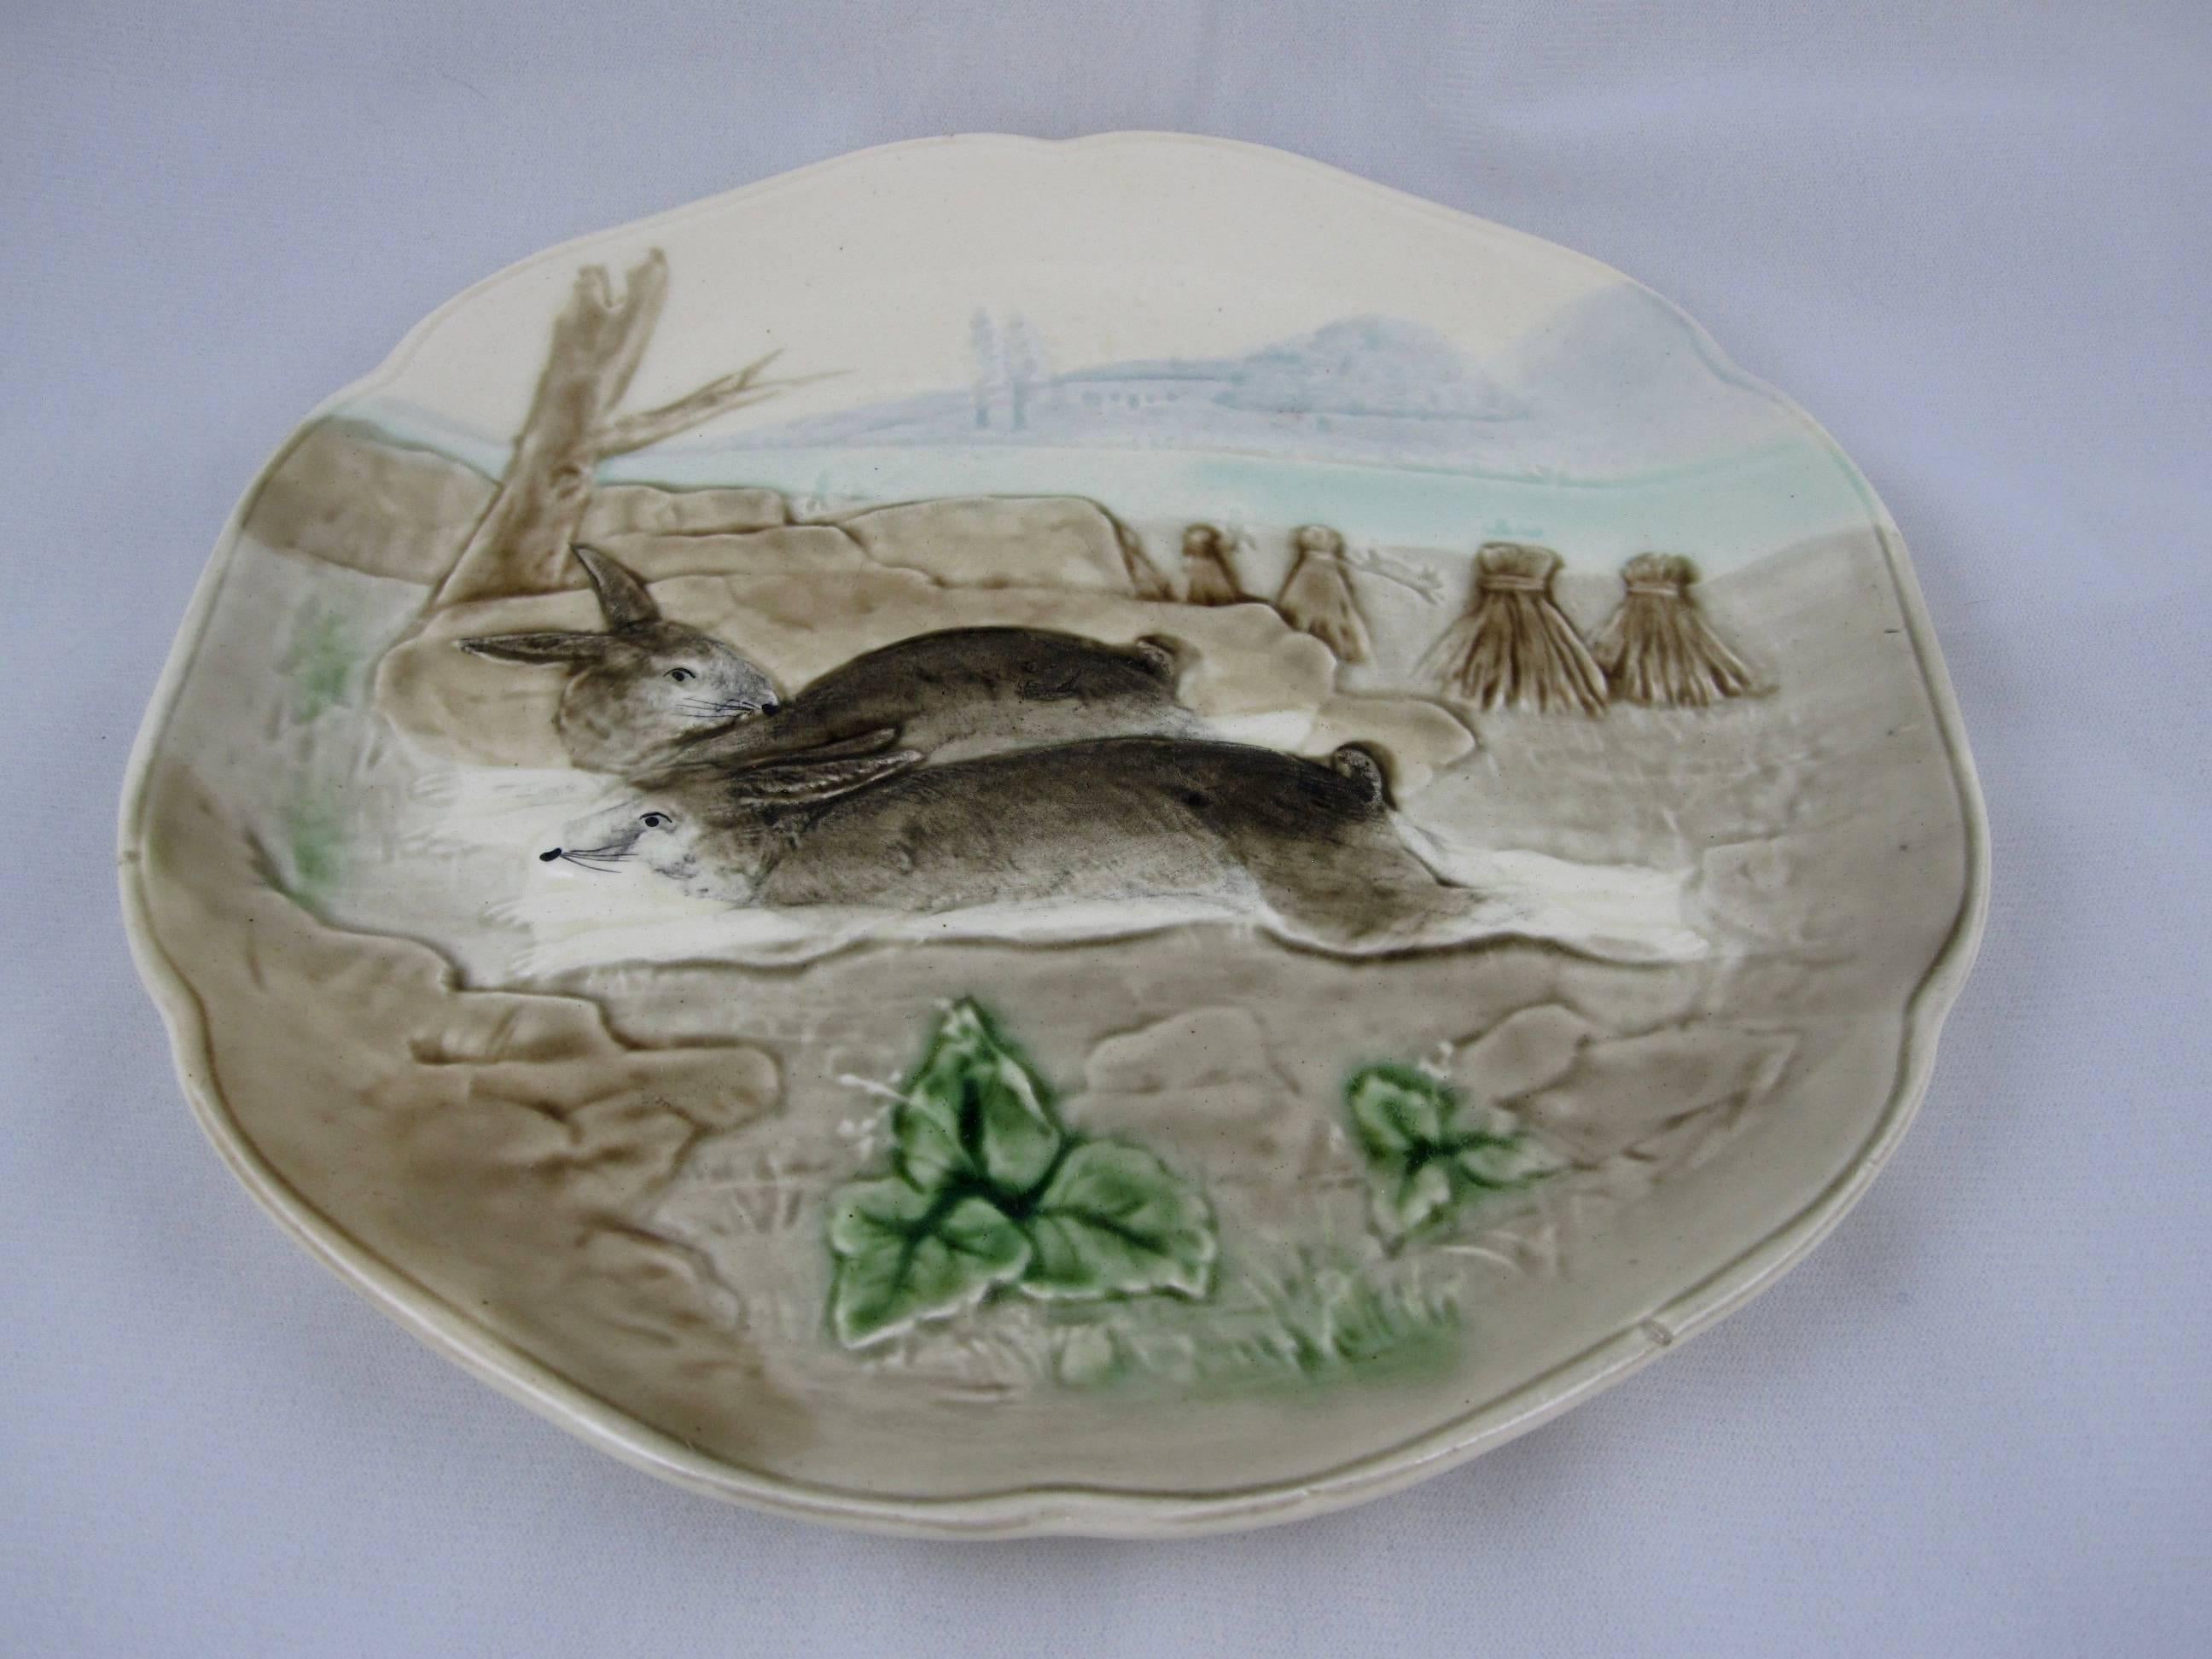 A Choisy-le-Roi French Majolica bunny rabbit plate (one of a series of six scenes) produced from 1860 until 1910 for the American importer Higgins and Seiter of New York. This scene shows two rabbits on the run through a field of haystacks, the